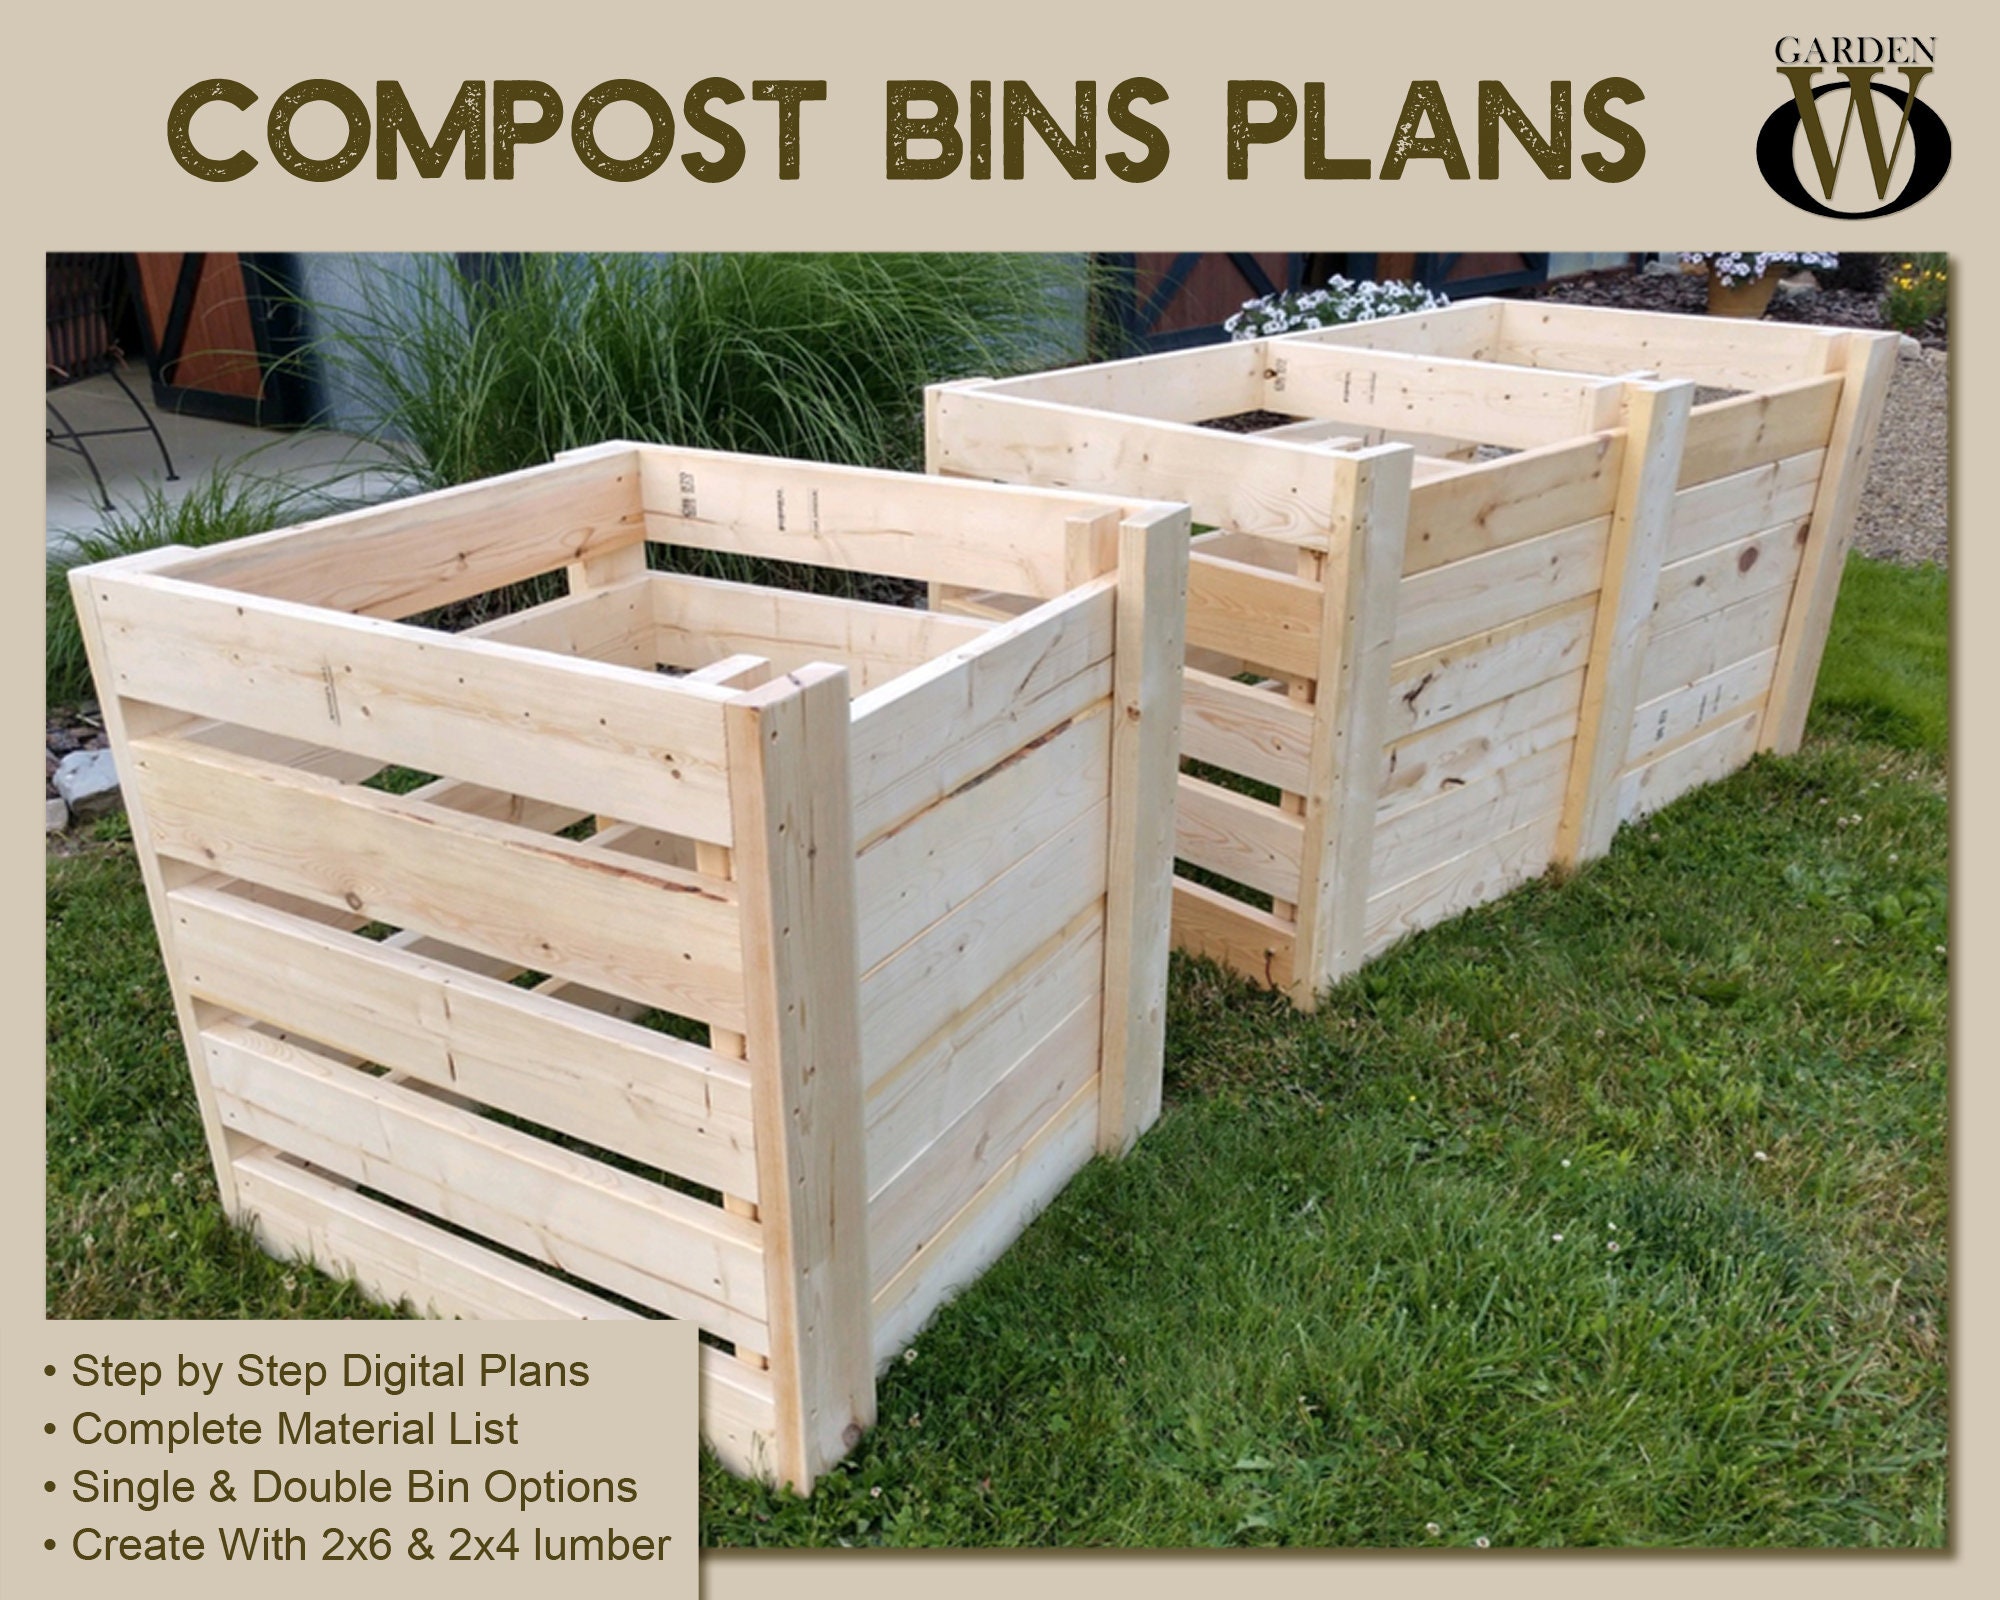 How To Create The Perfect DIY Compost Bins - Attractive & Inexpensive!